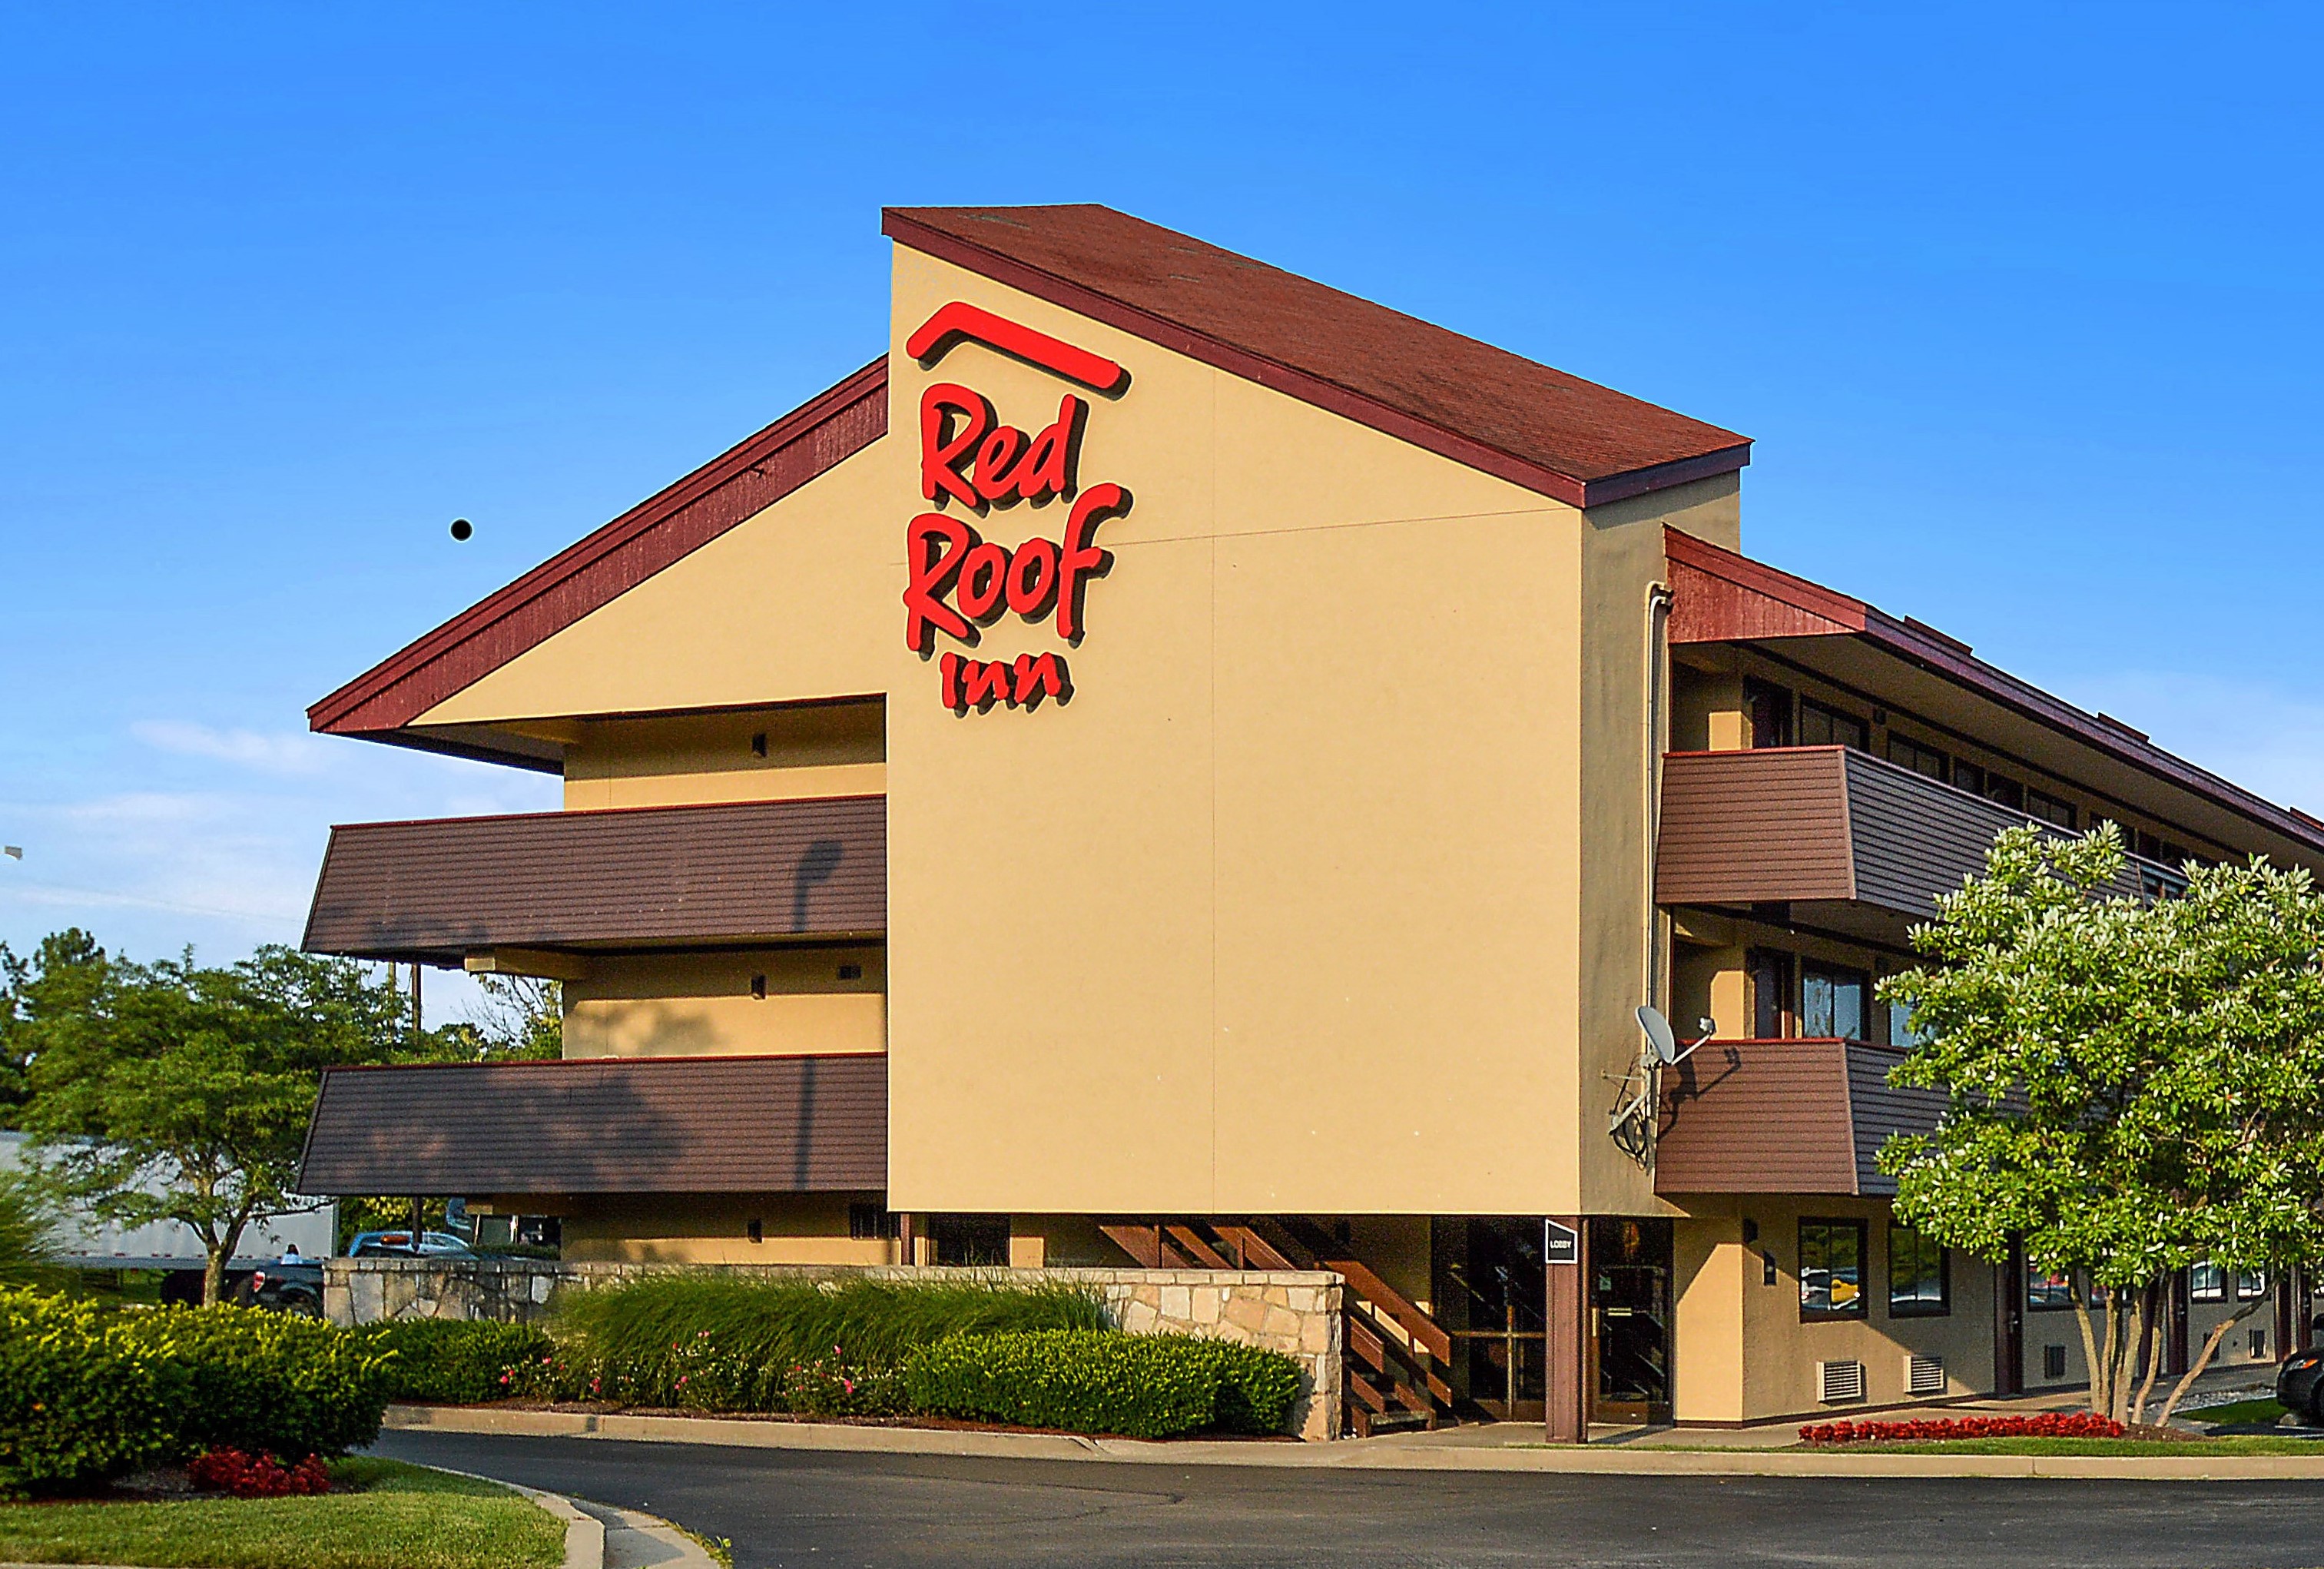 Cheap, Smoke Free Hotels in Lexington, KY 40503 Red Roof